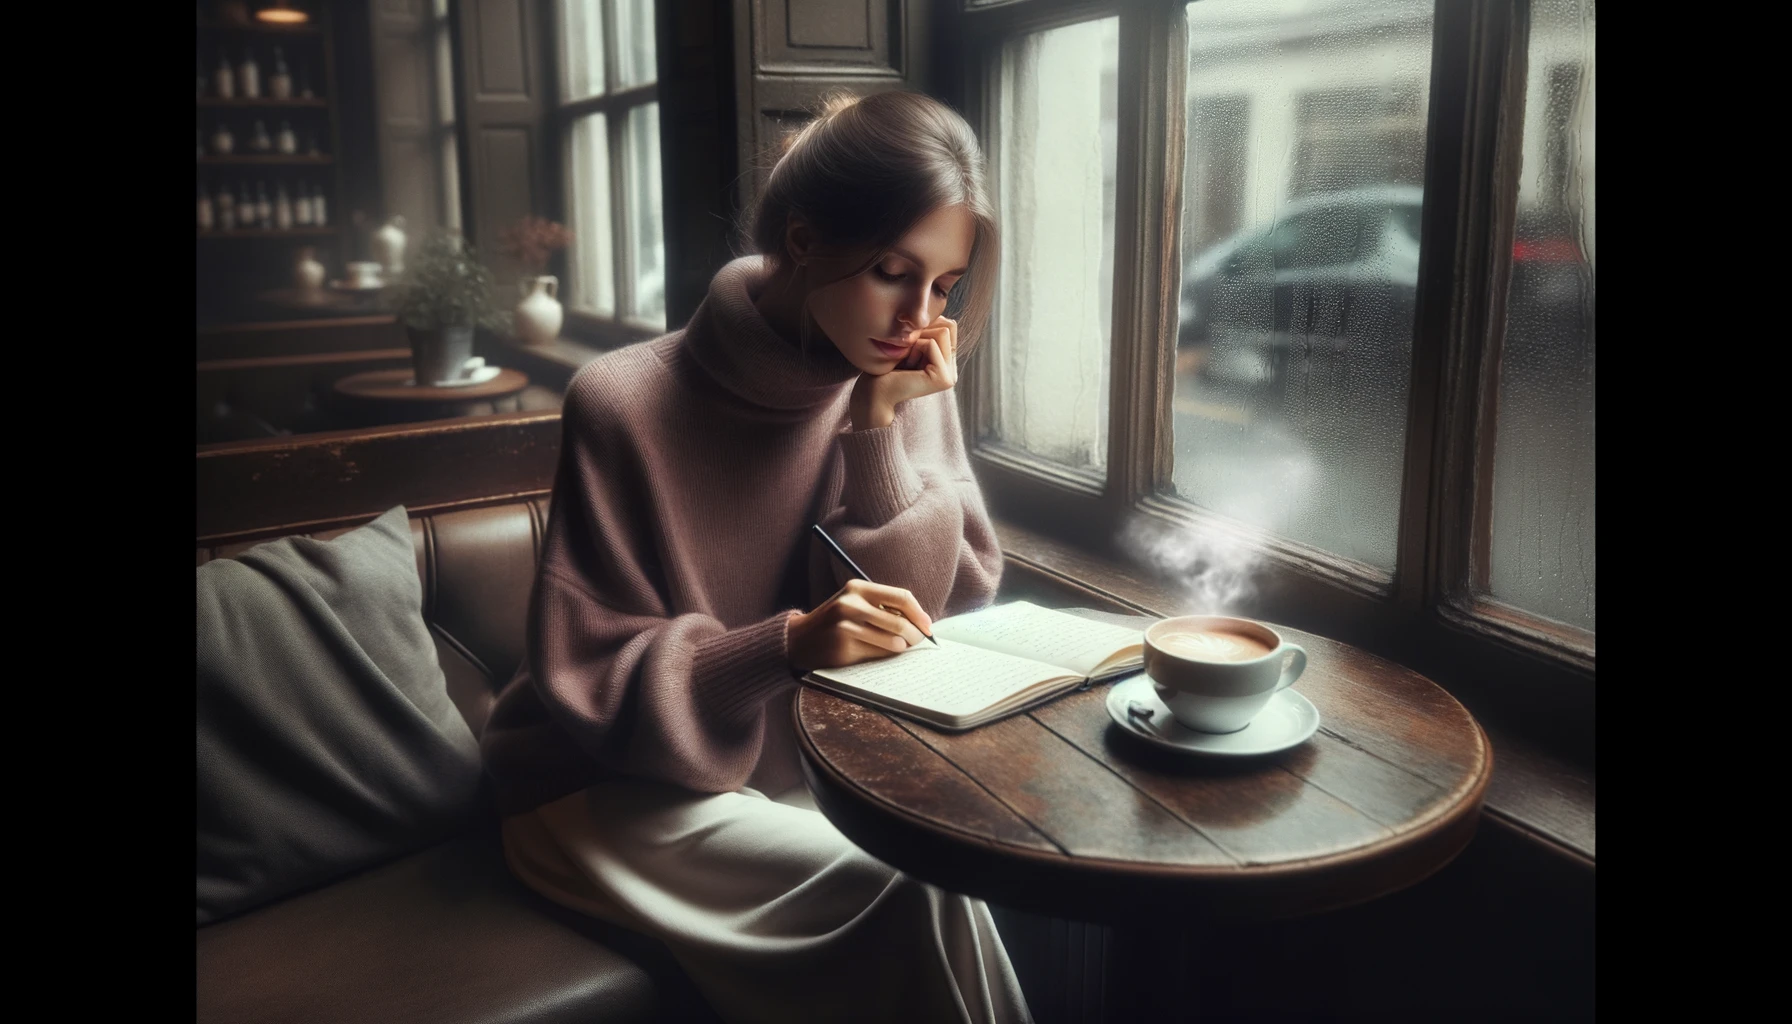 A photorealistic scene of a European female poet in her 30s, seated in a cozy coffee shop by a window on a rainy day.